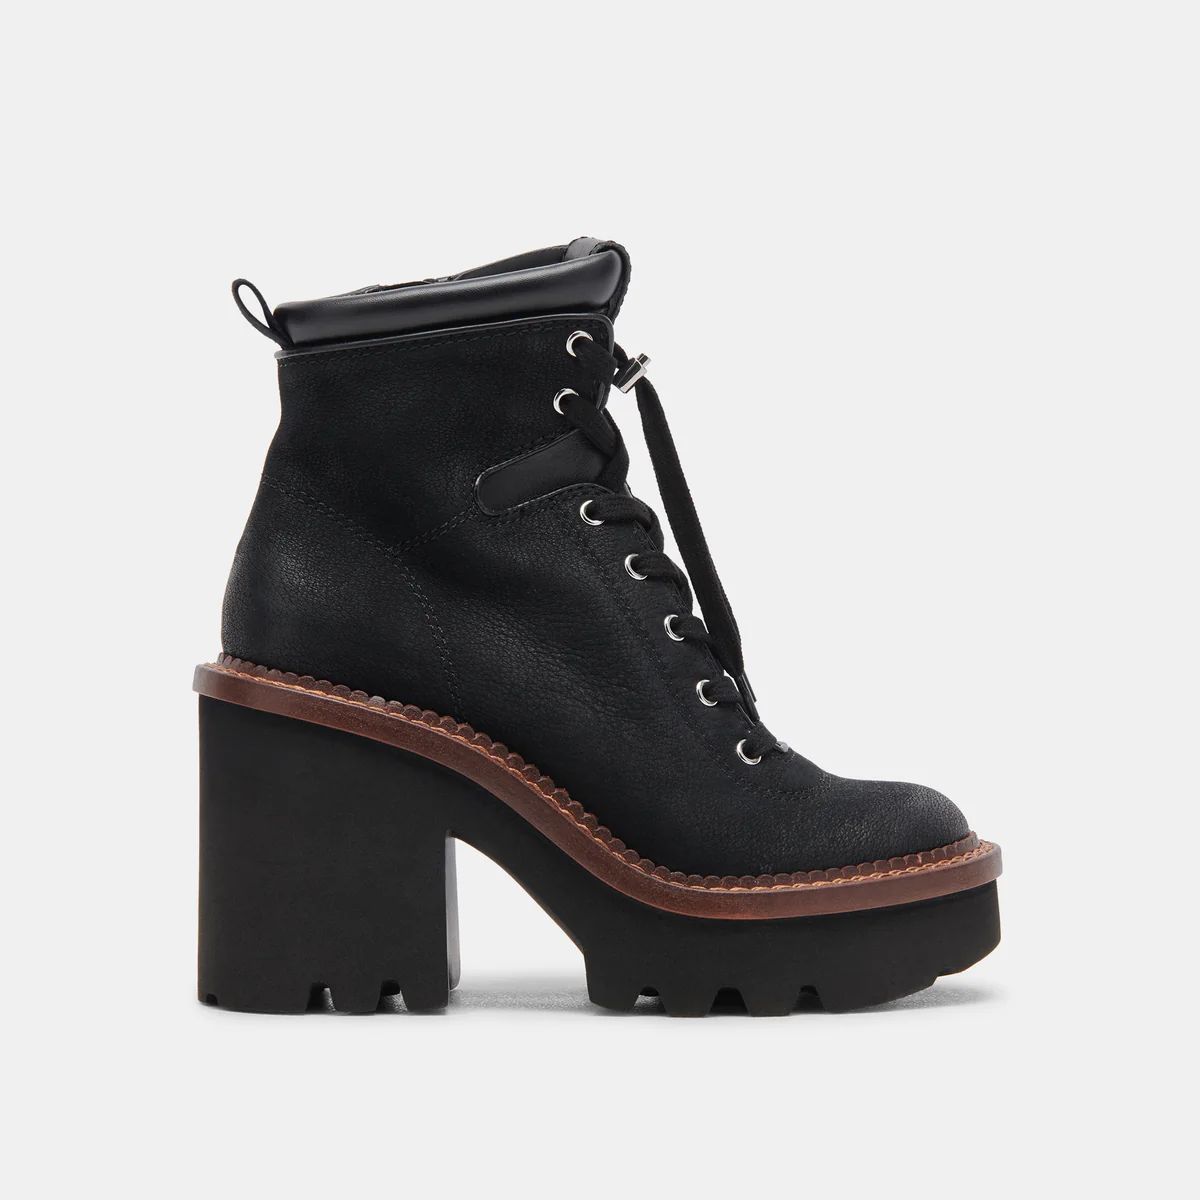 Dommie Boots | DolceVita.com